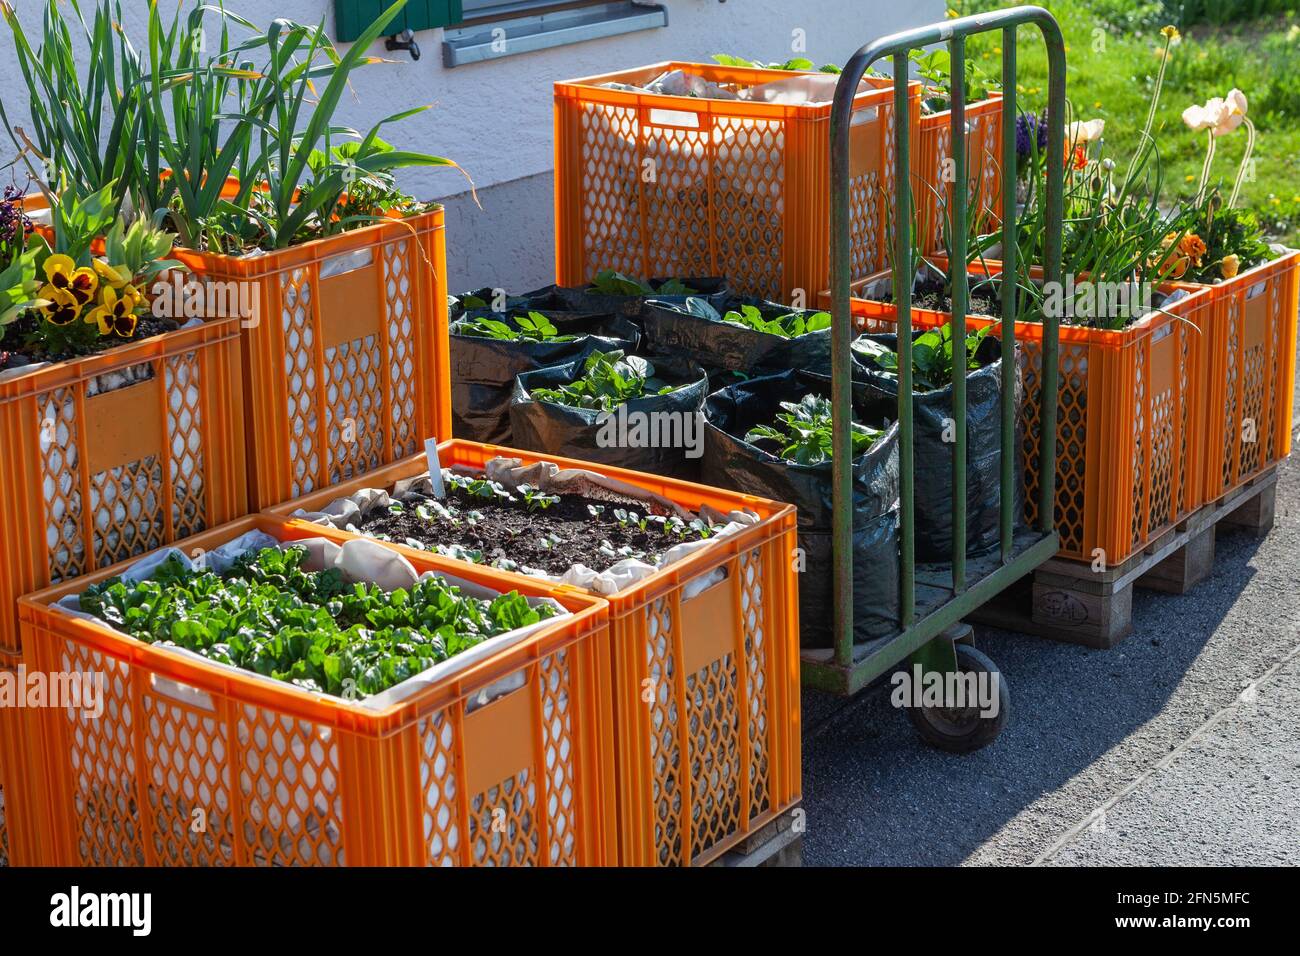 Flexible flower and vegetable beds in plastic crates Stock Photo